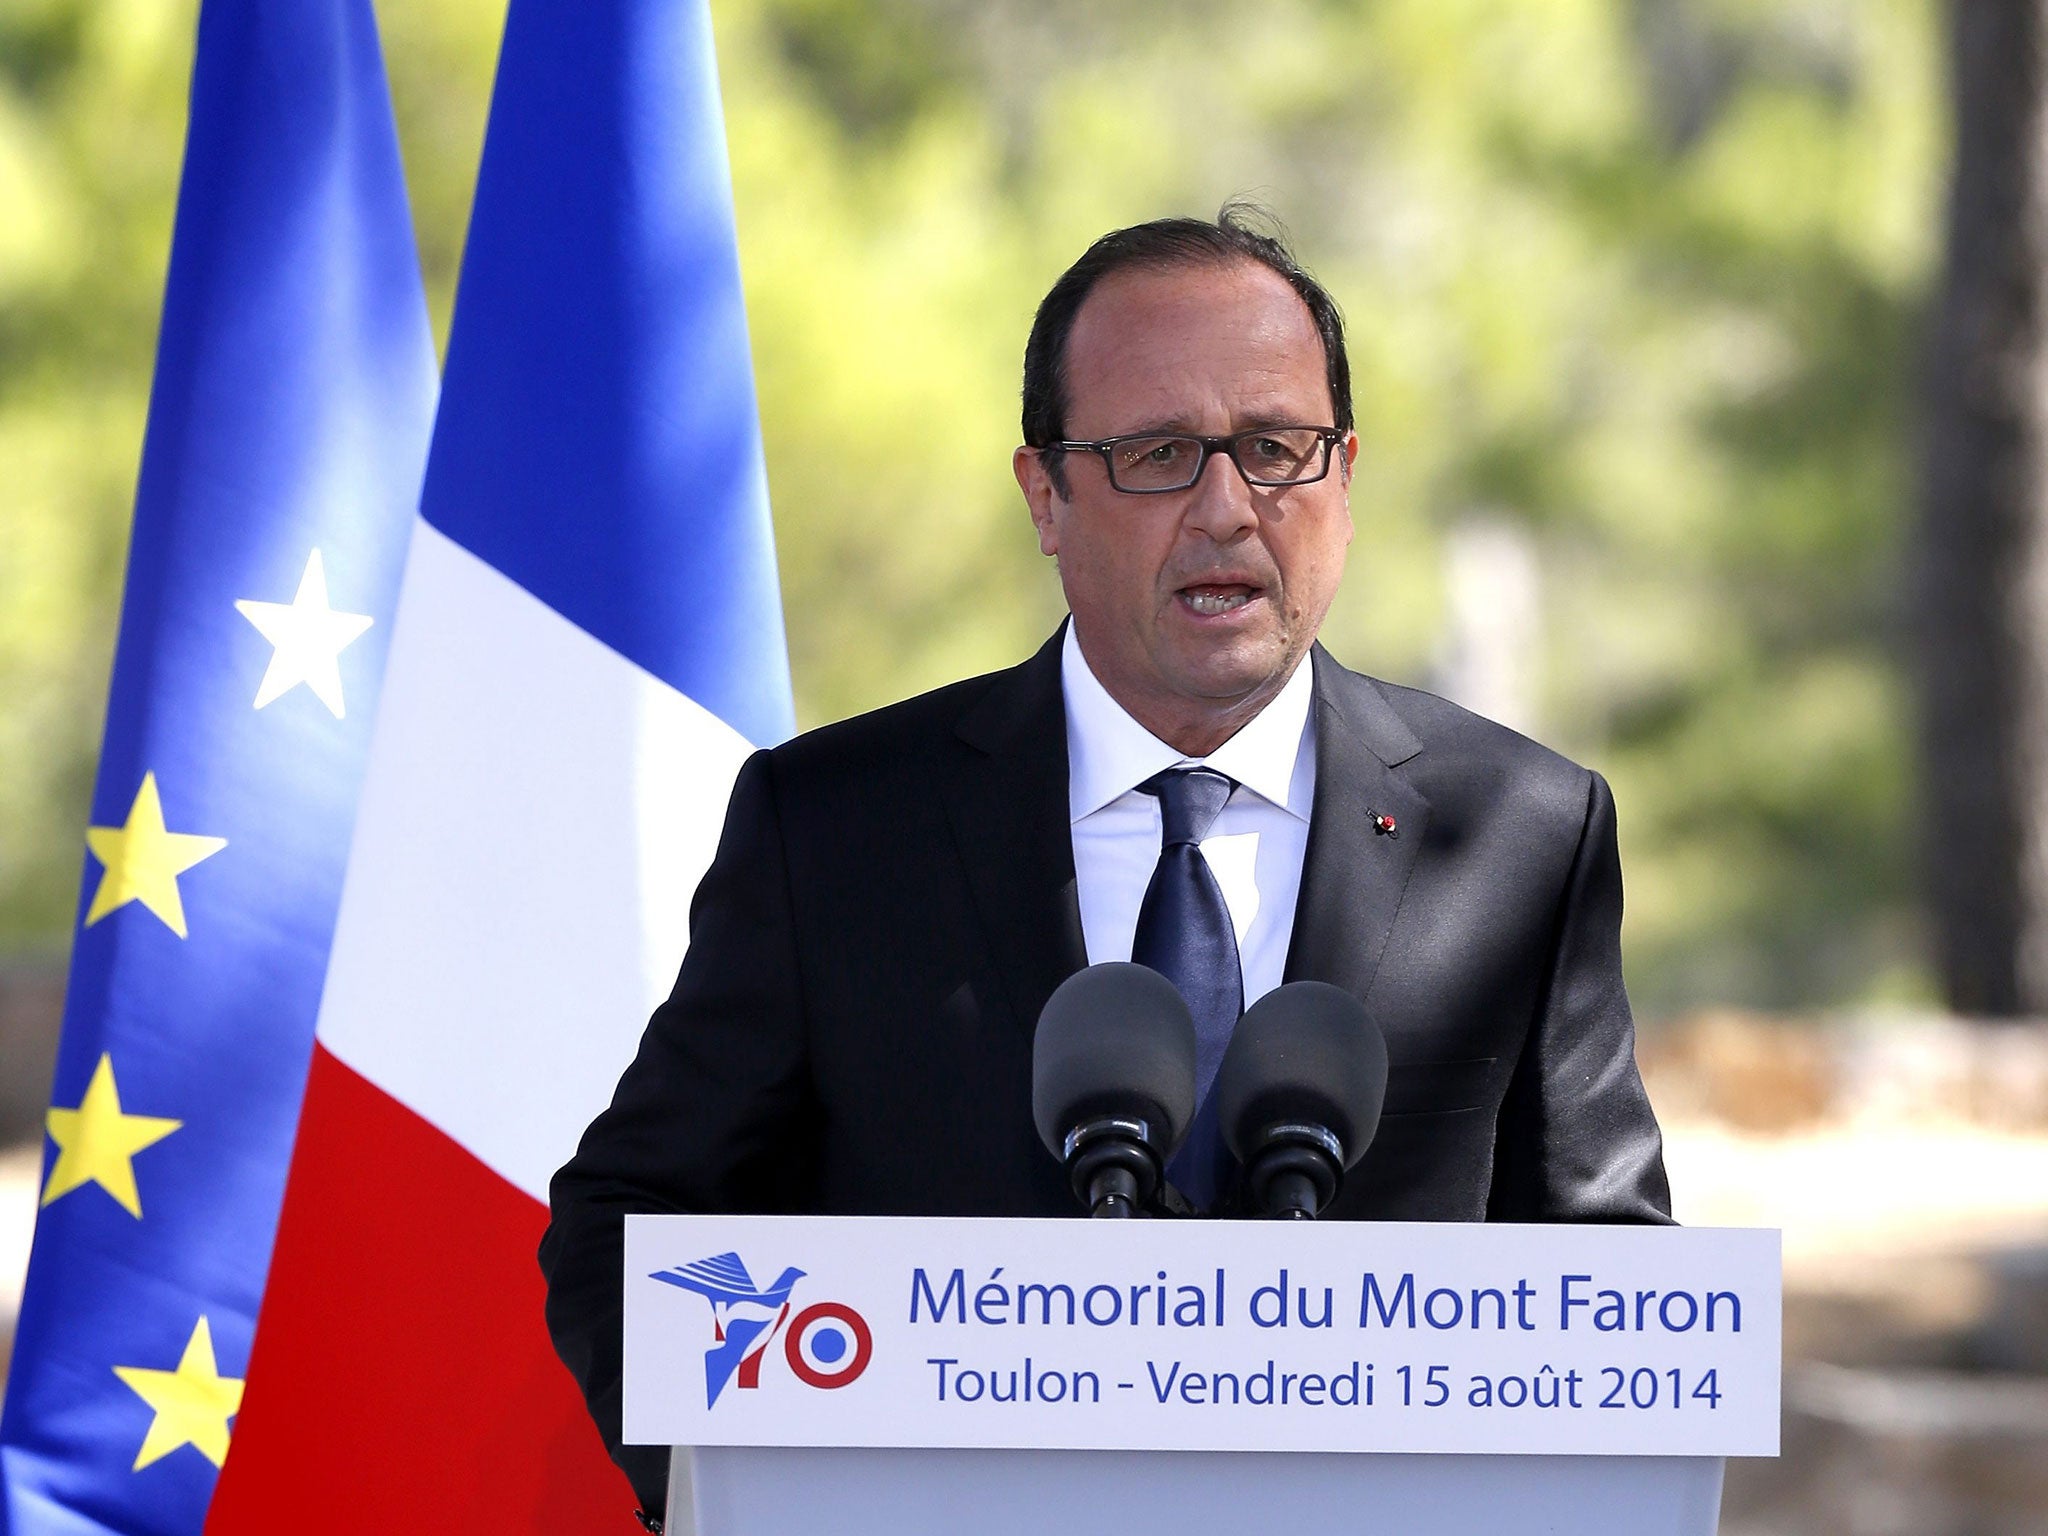 Francois Hollande delivers a speech during the ceremony